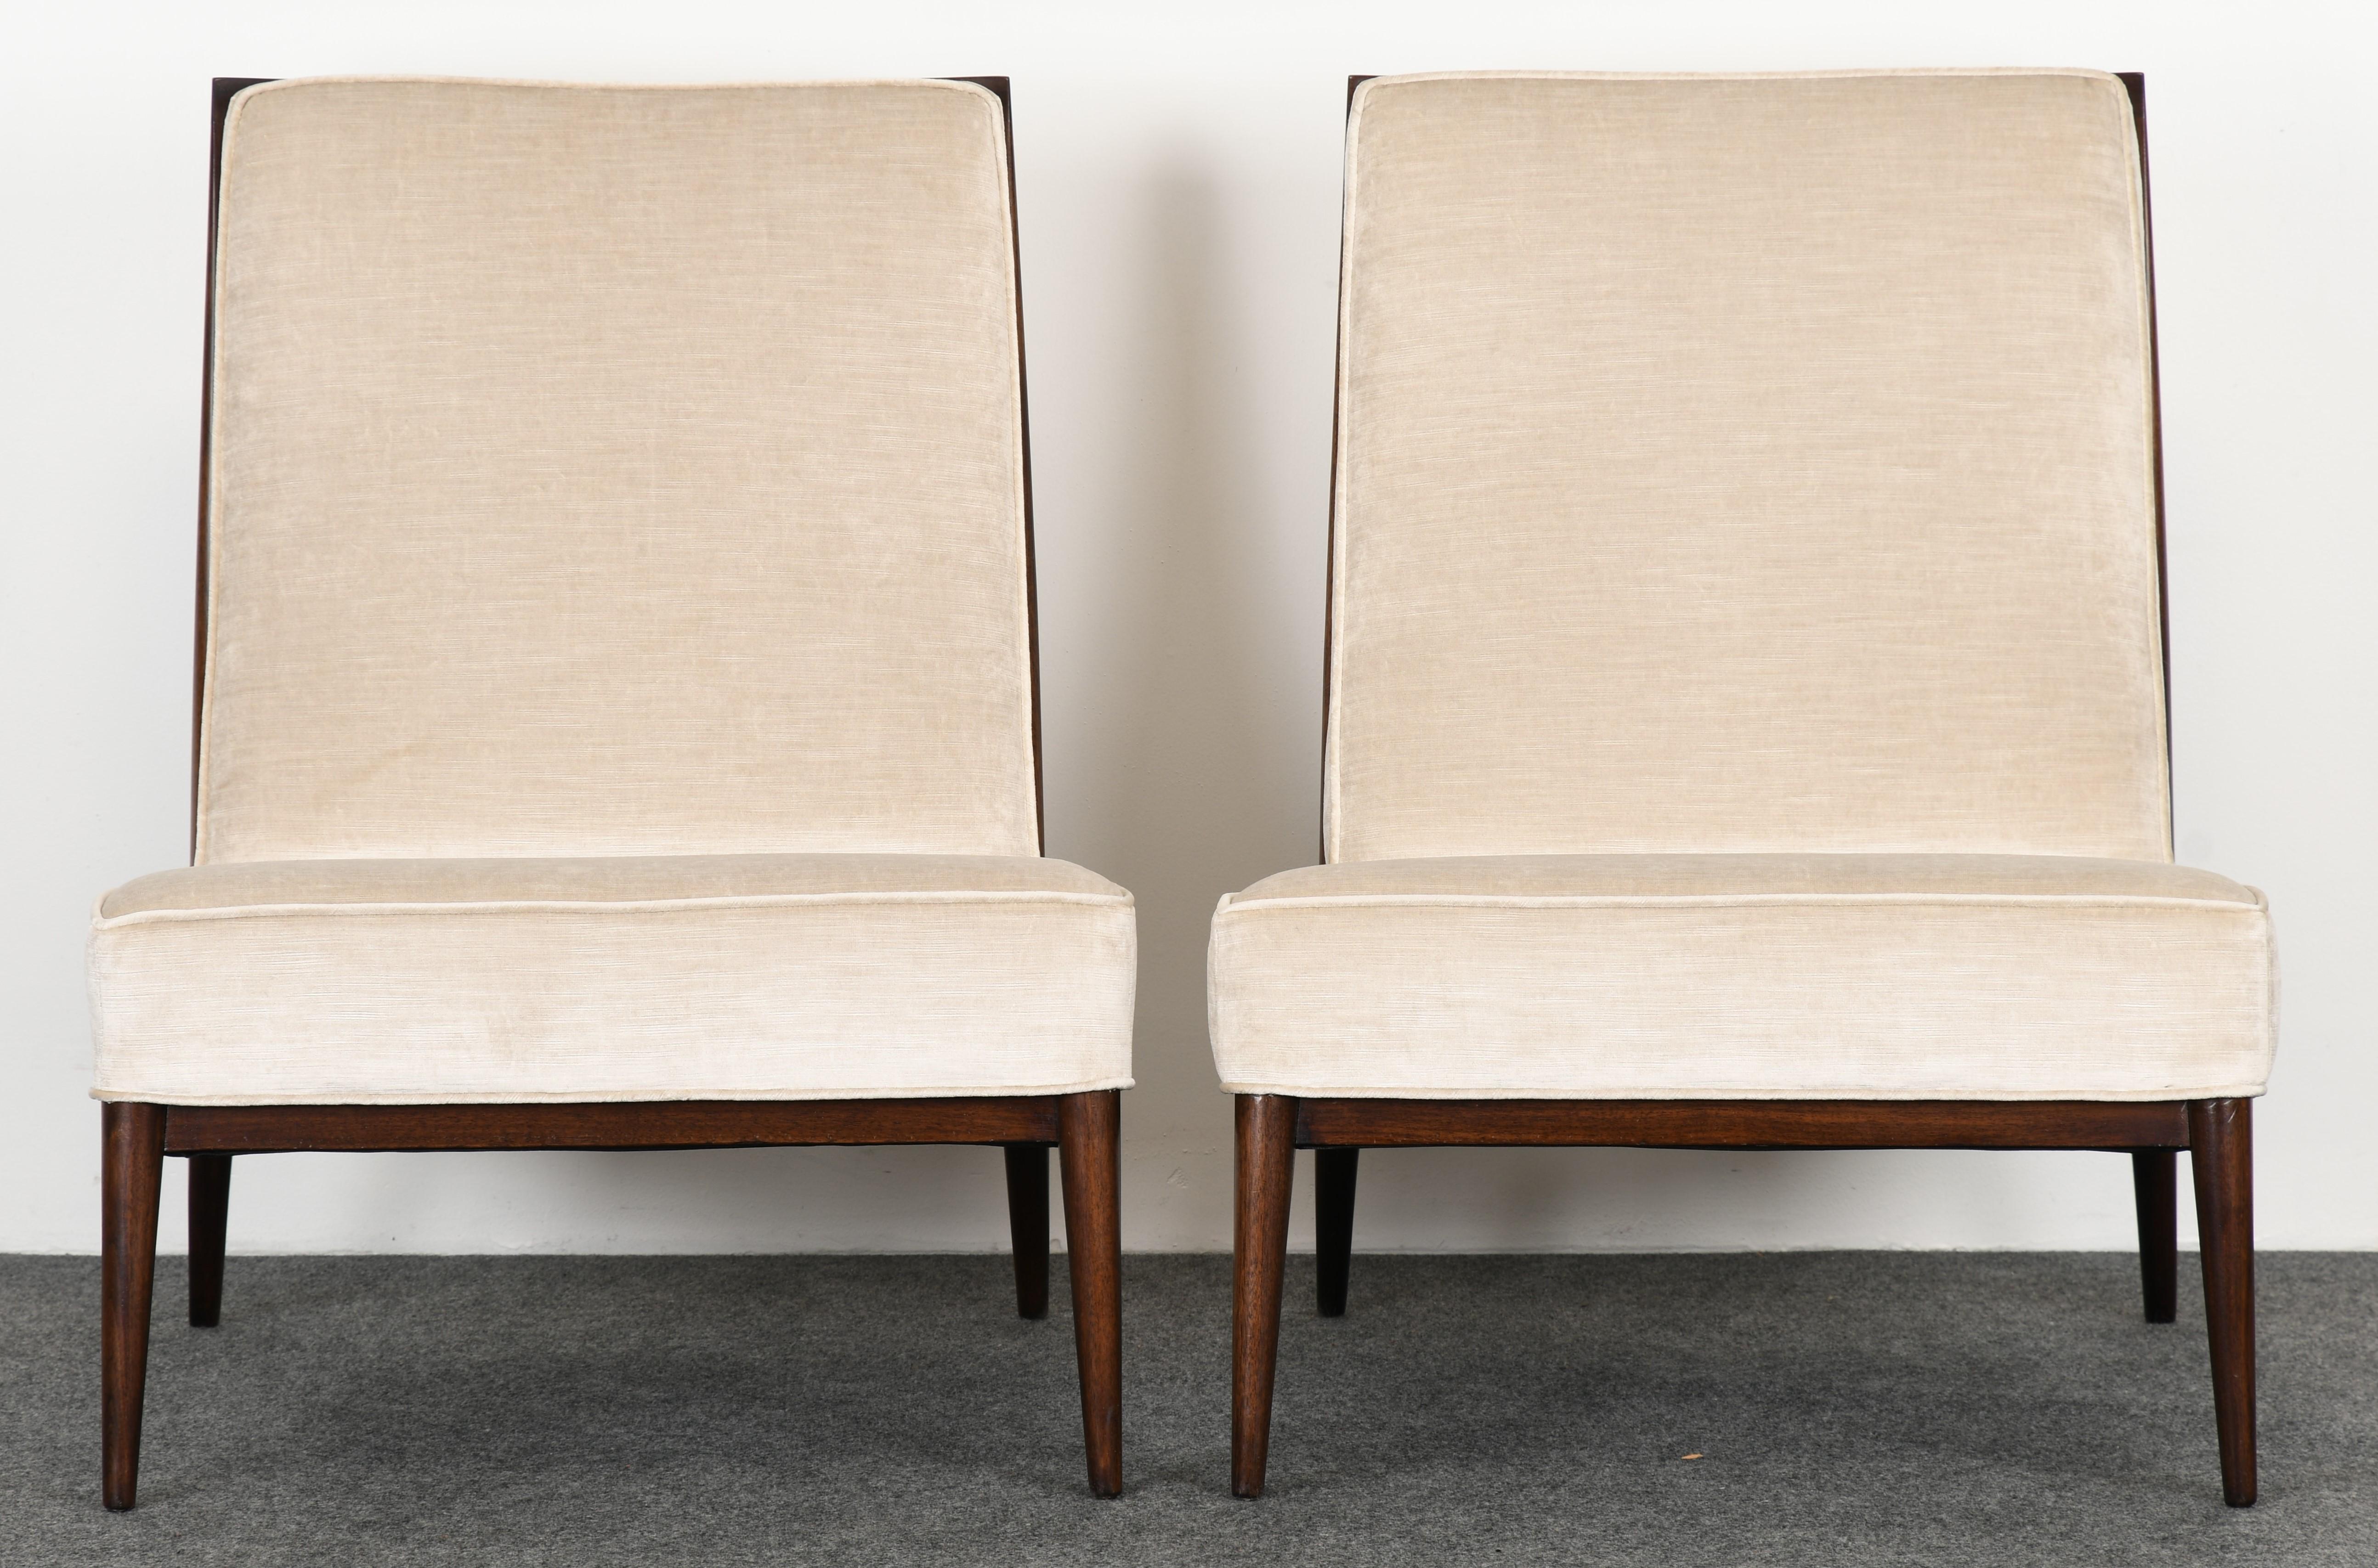 Mid-20th Century Pair of Paul McCobb Slipper Chairs for Directional, 1950s